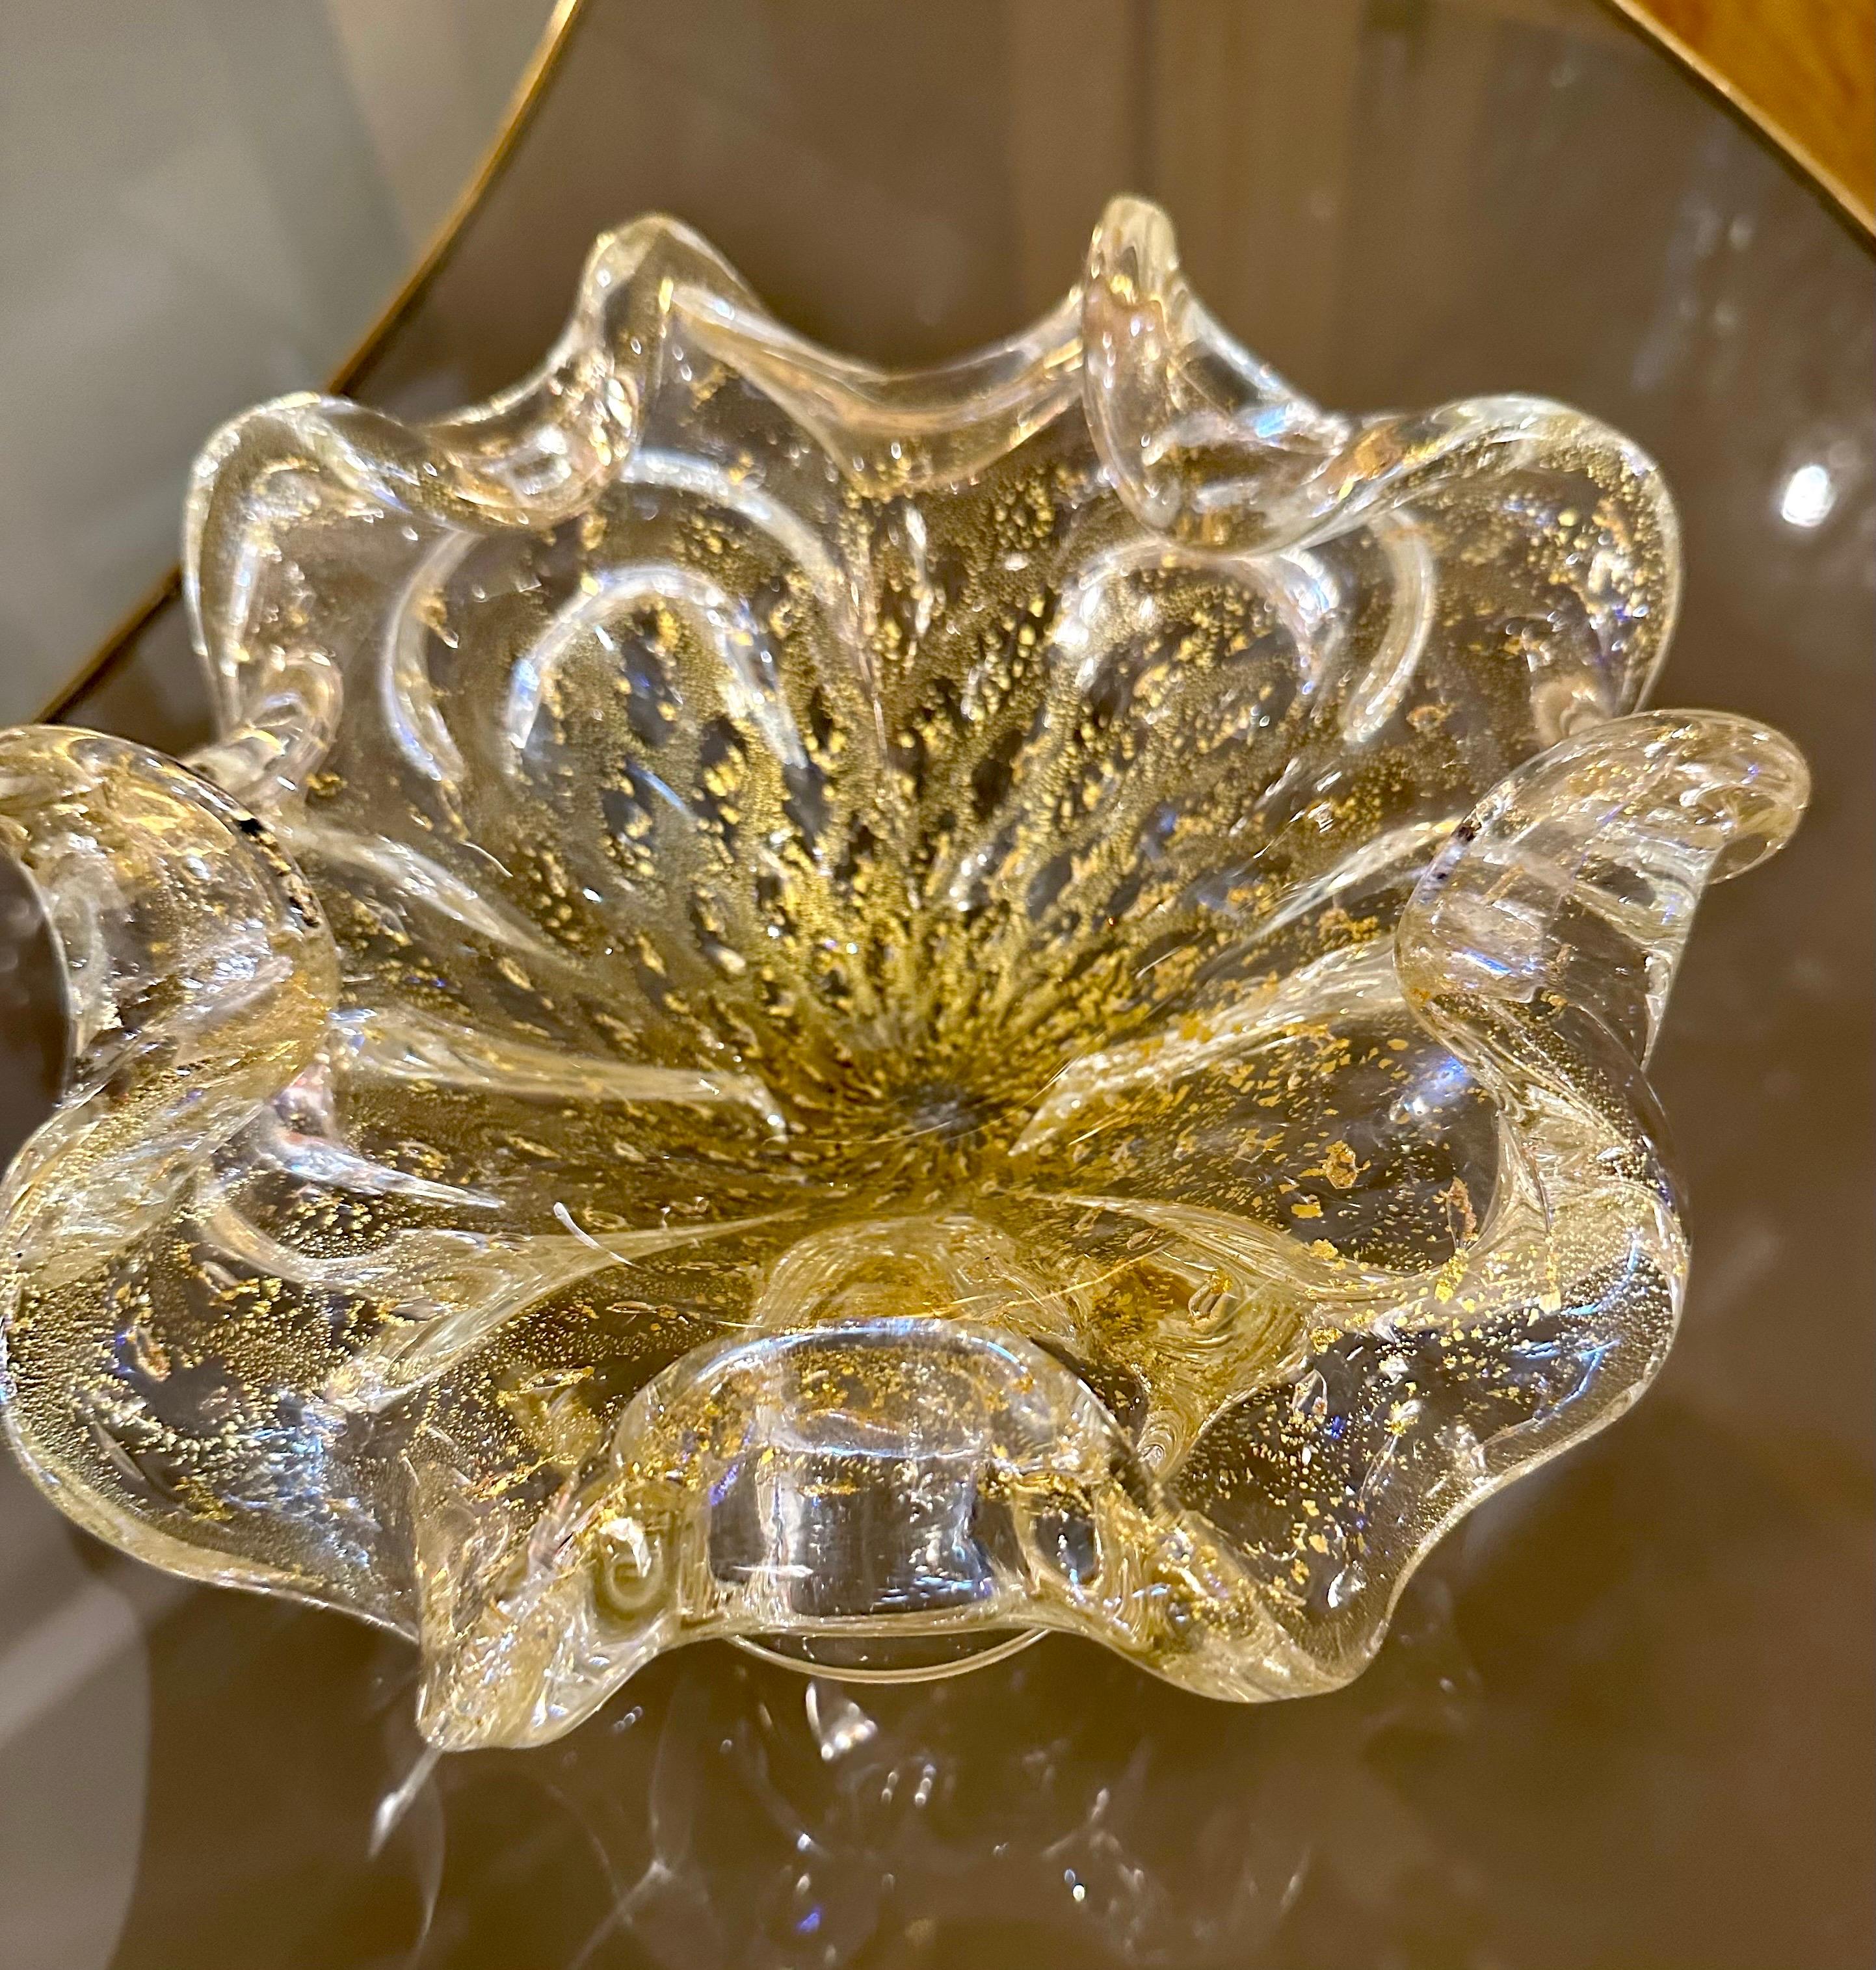 Italian Barovier Tosso Murano Glass Centerpiece with Gold Inclusion  For Sale